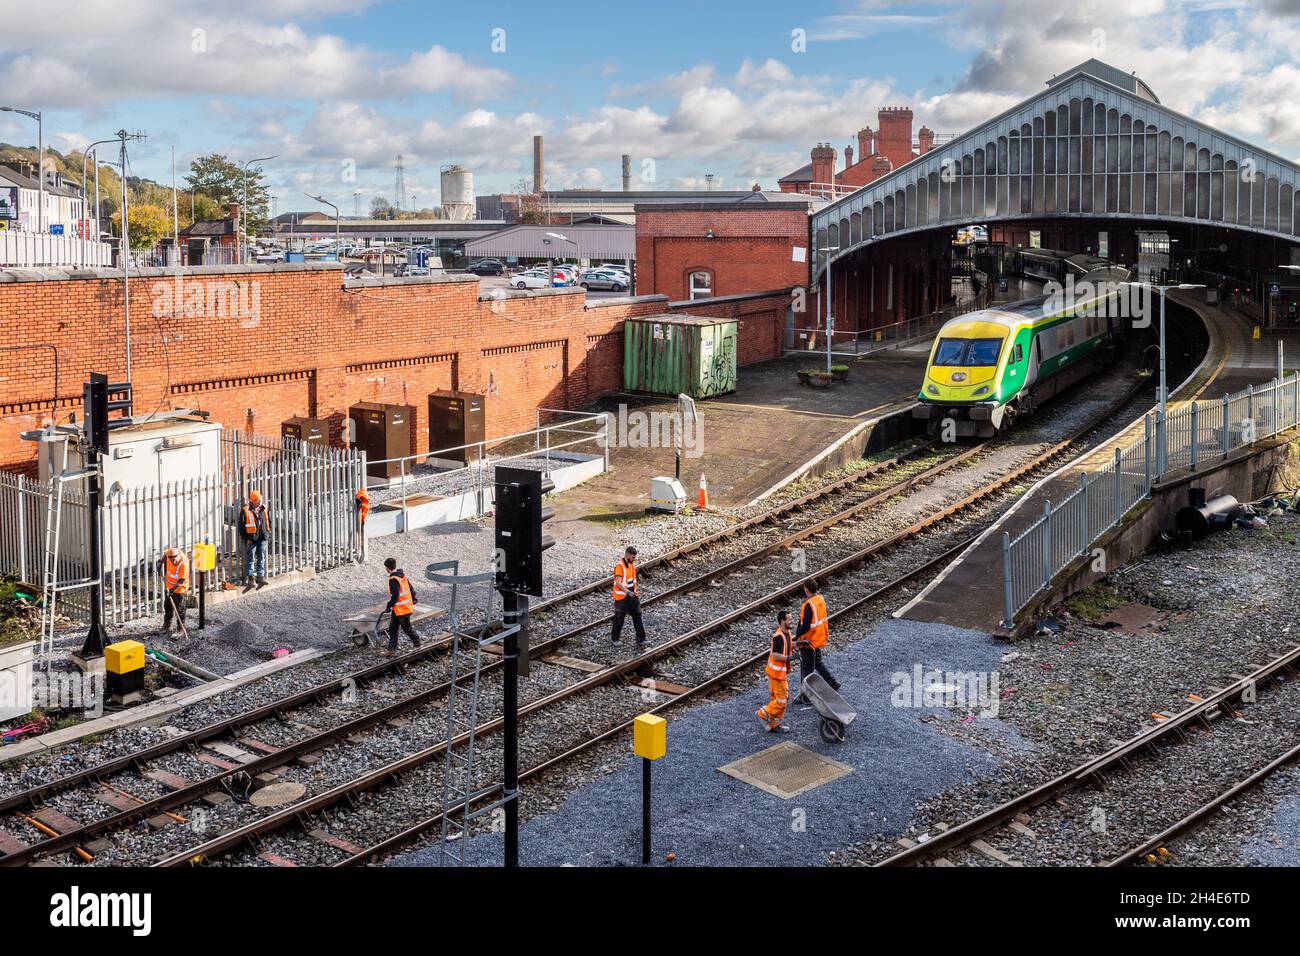 Cork, Ireland. 2nd Nov, 2021. Irish Rail workers perform maintenance on the railway line at Cork Railway Station. The works are part of an €8 million signalling system upgrade. The works are due to finish on Thursday 4th November. Credit: AG News/Alamy Live News Stock Photo